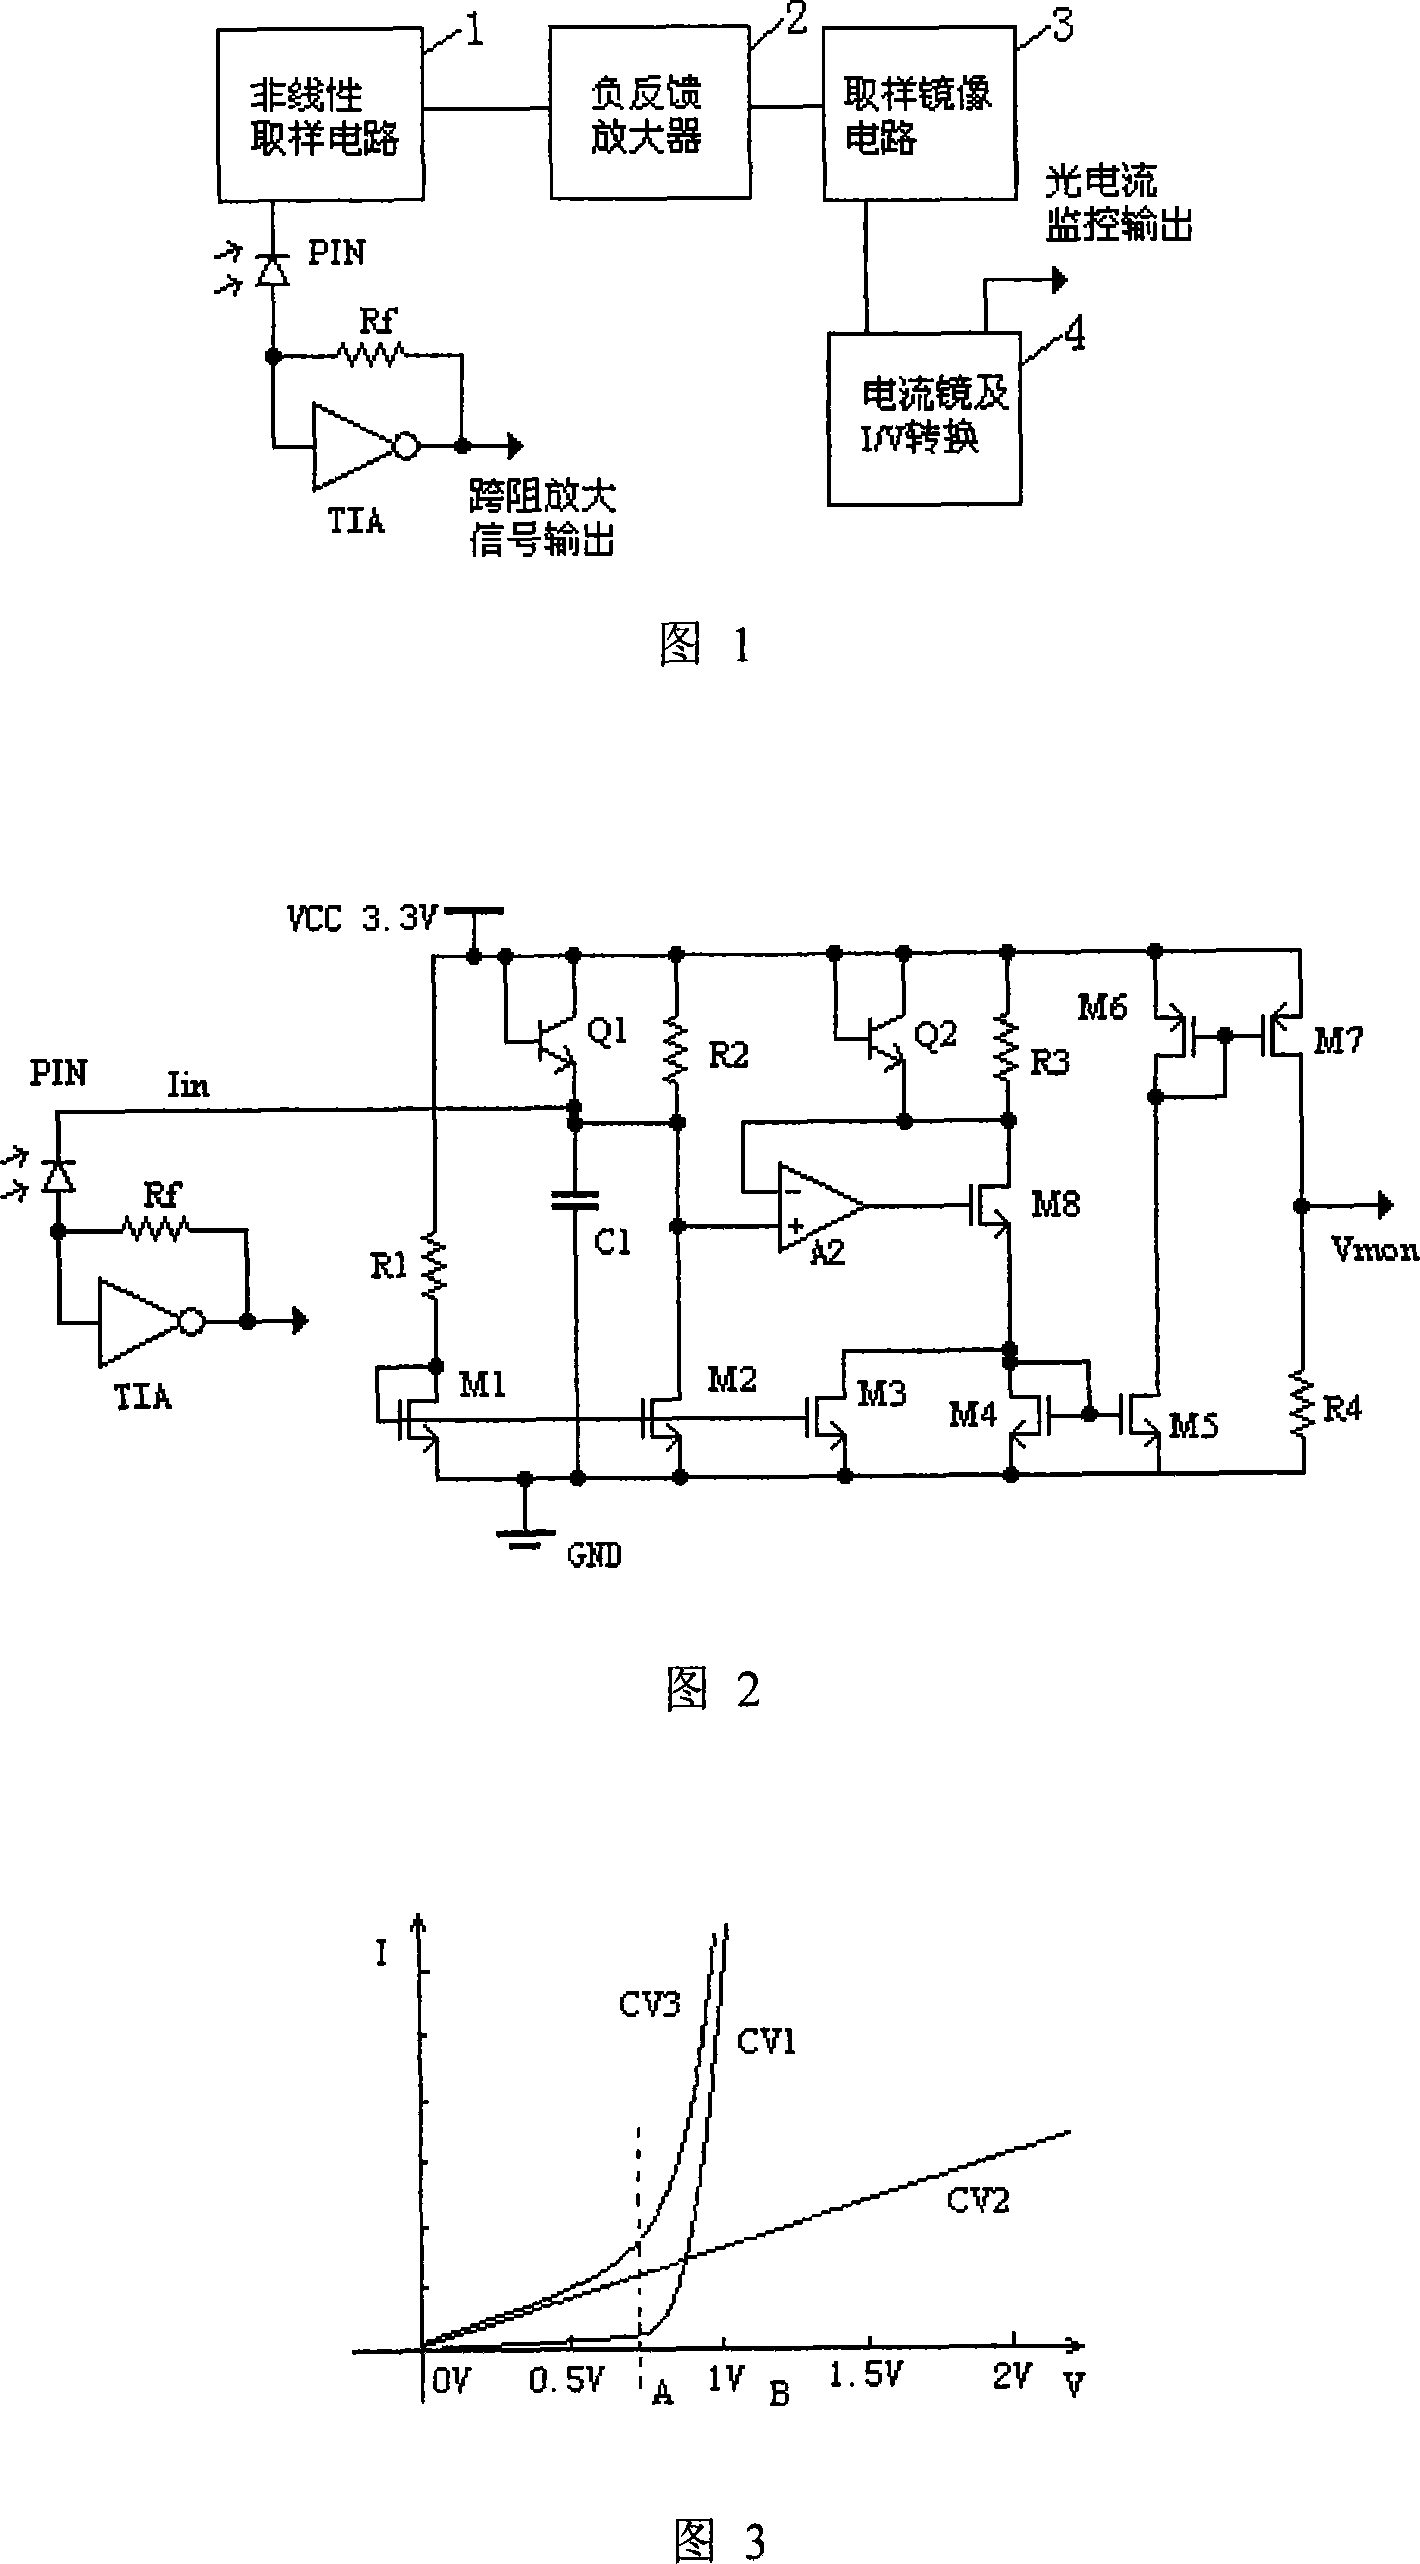 Photocurrent monitoring circuit for transimpedance amplifier